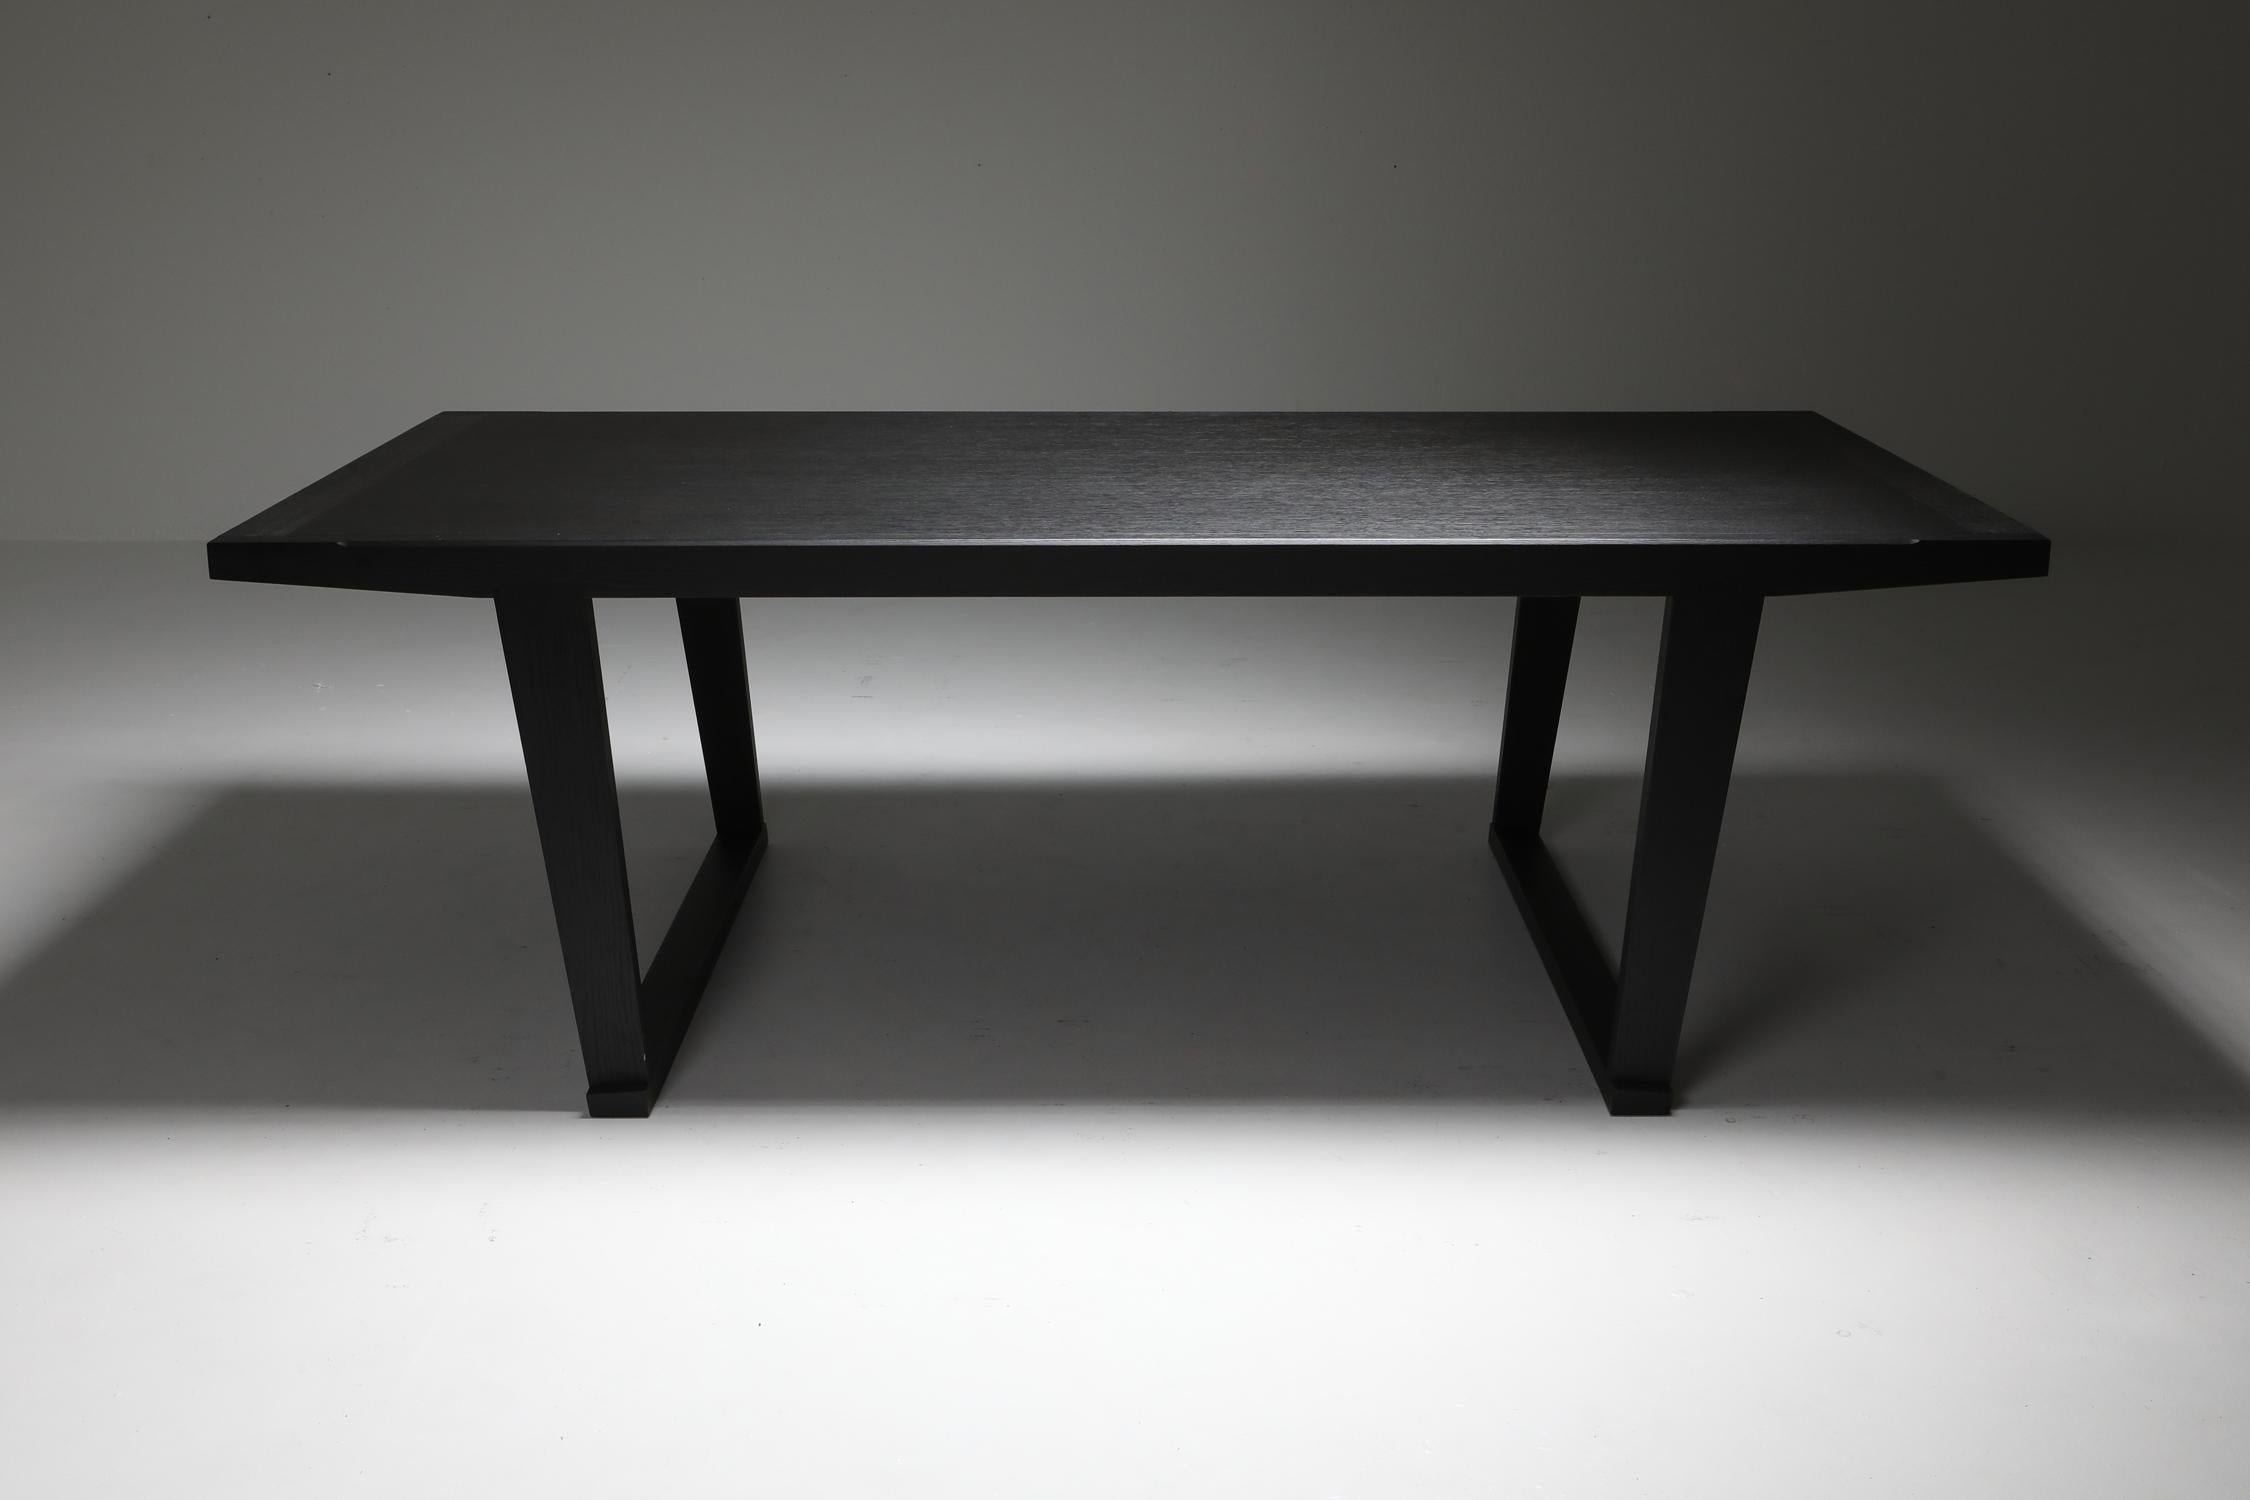 Maxalto, Antontio Citterio, ebonized oak dining table, 2004


Antonio Citterio was born in Meda in 1950, started his design office in 1972, and graduated in architecture at the Milan Polytechnic in 1975.
Between 1987 and 1996 he worked in